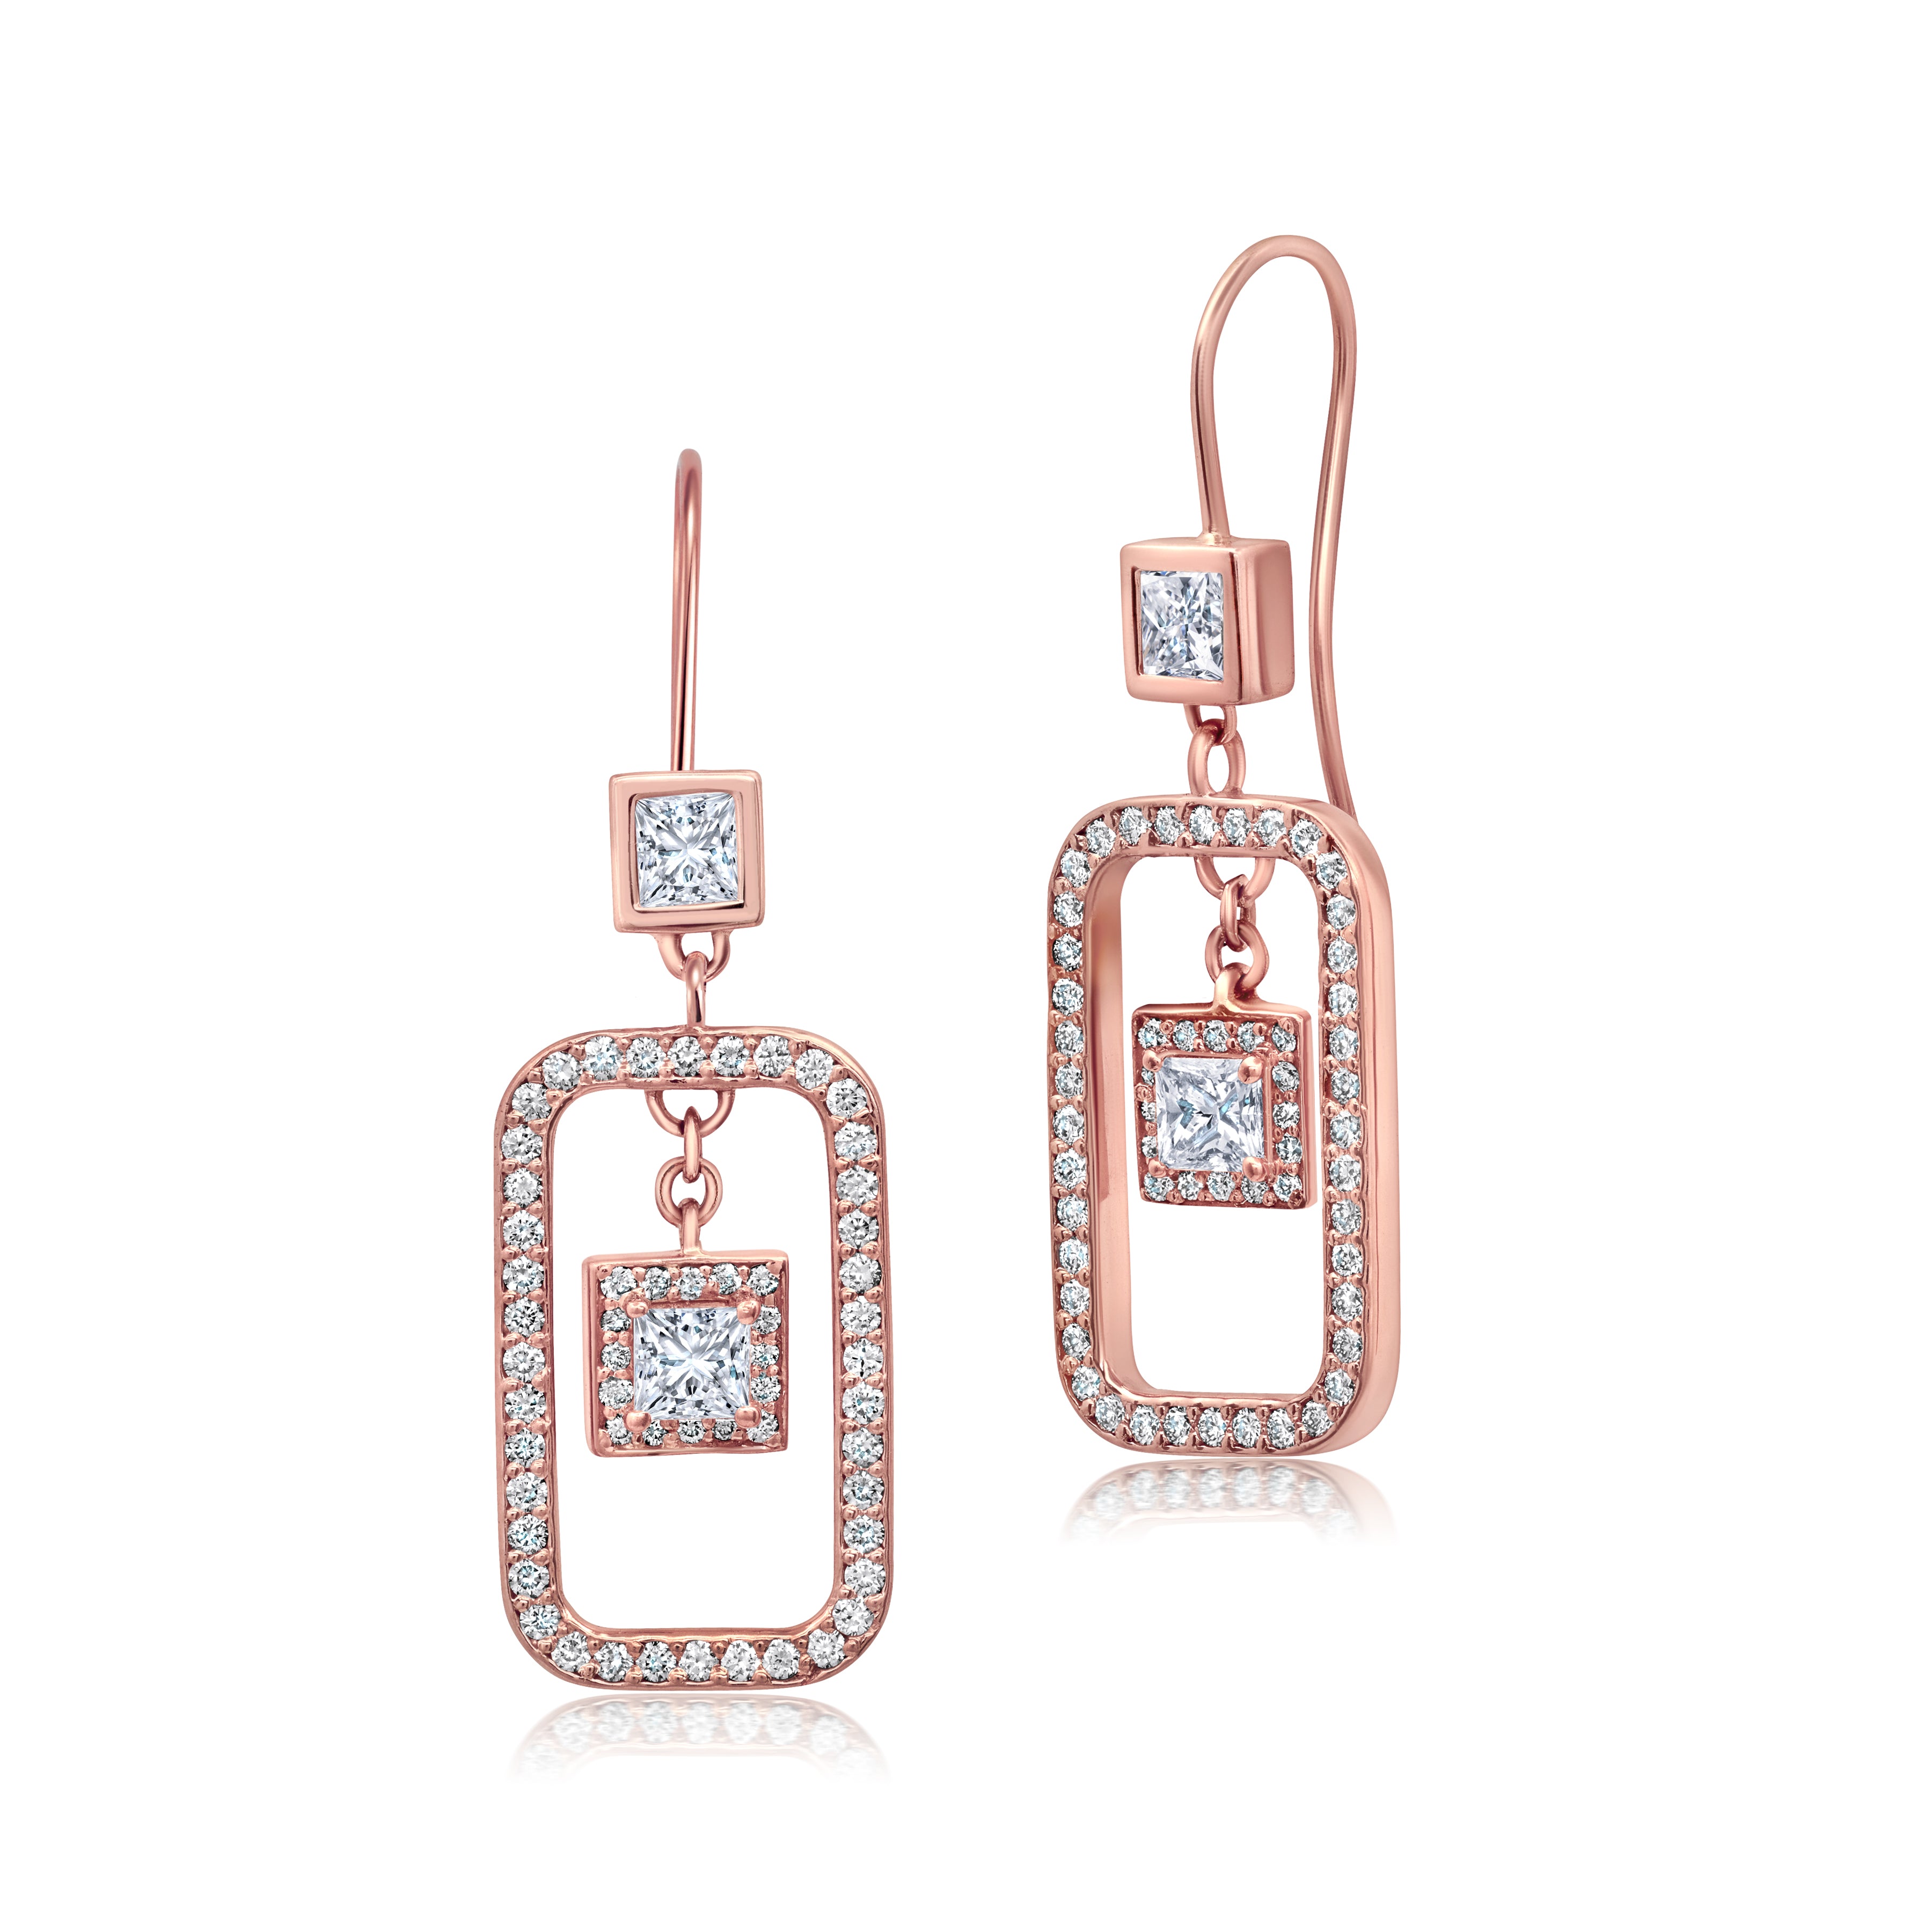 Icy Link Earrings - Rose Gold